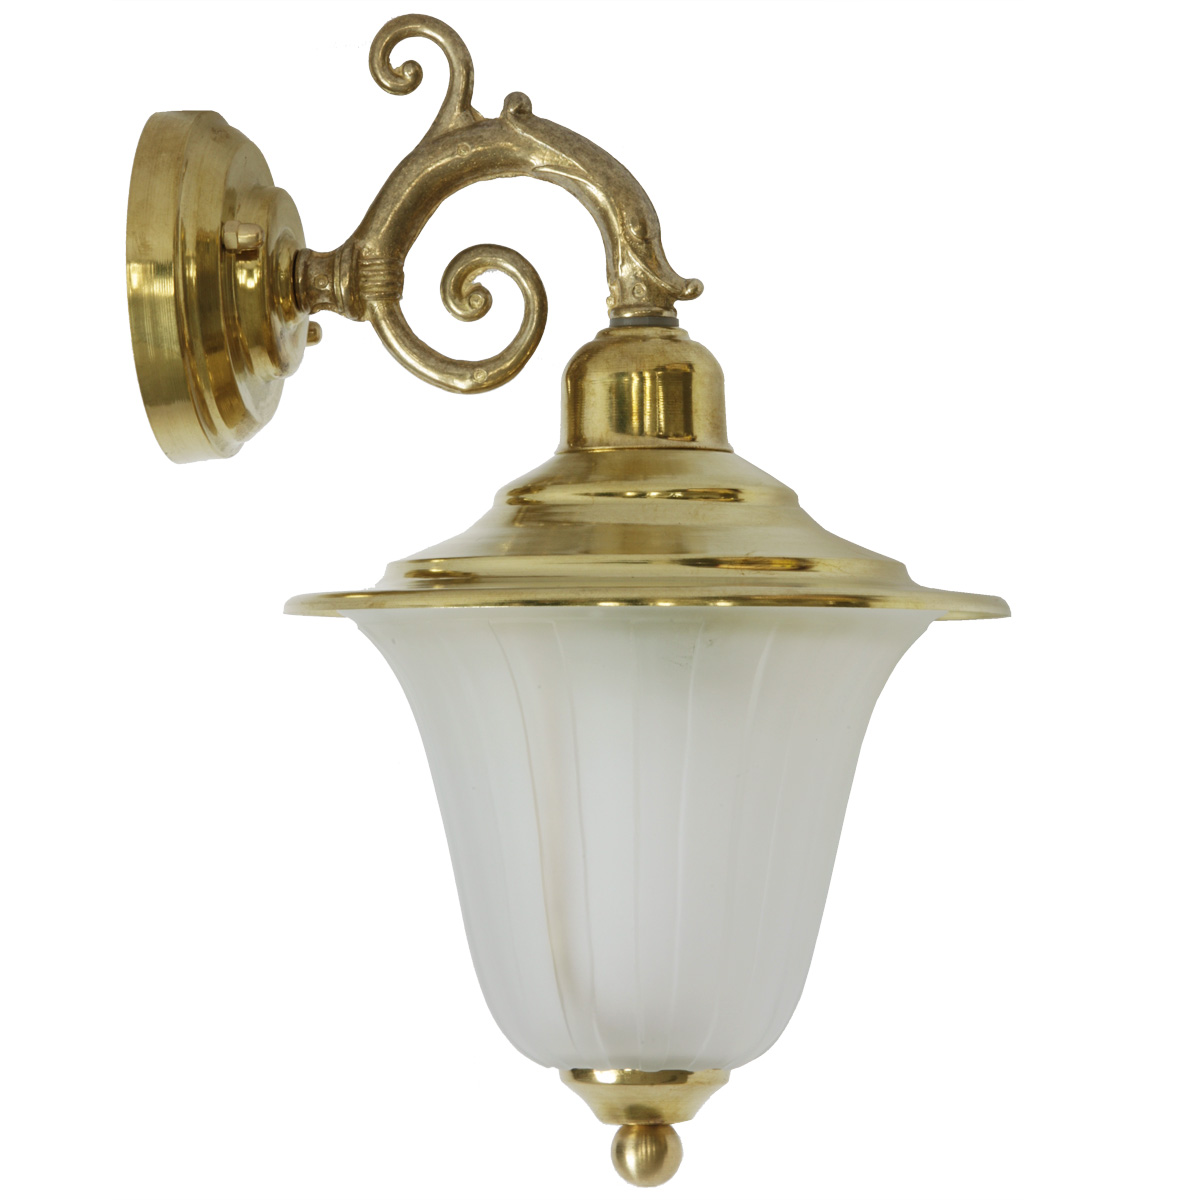 Charming outdoor wall light N° 307 made of brass